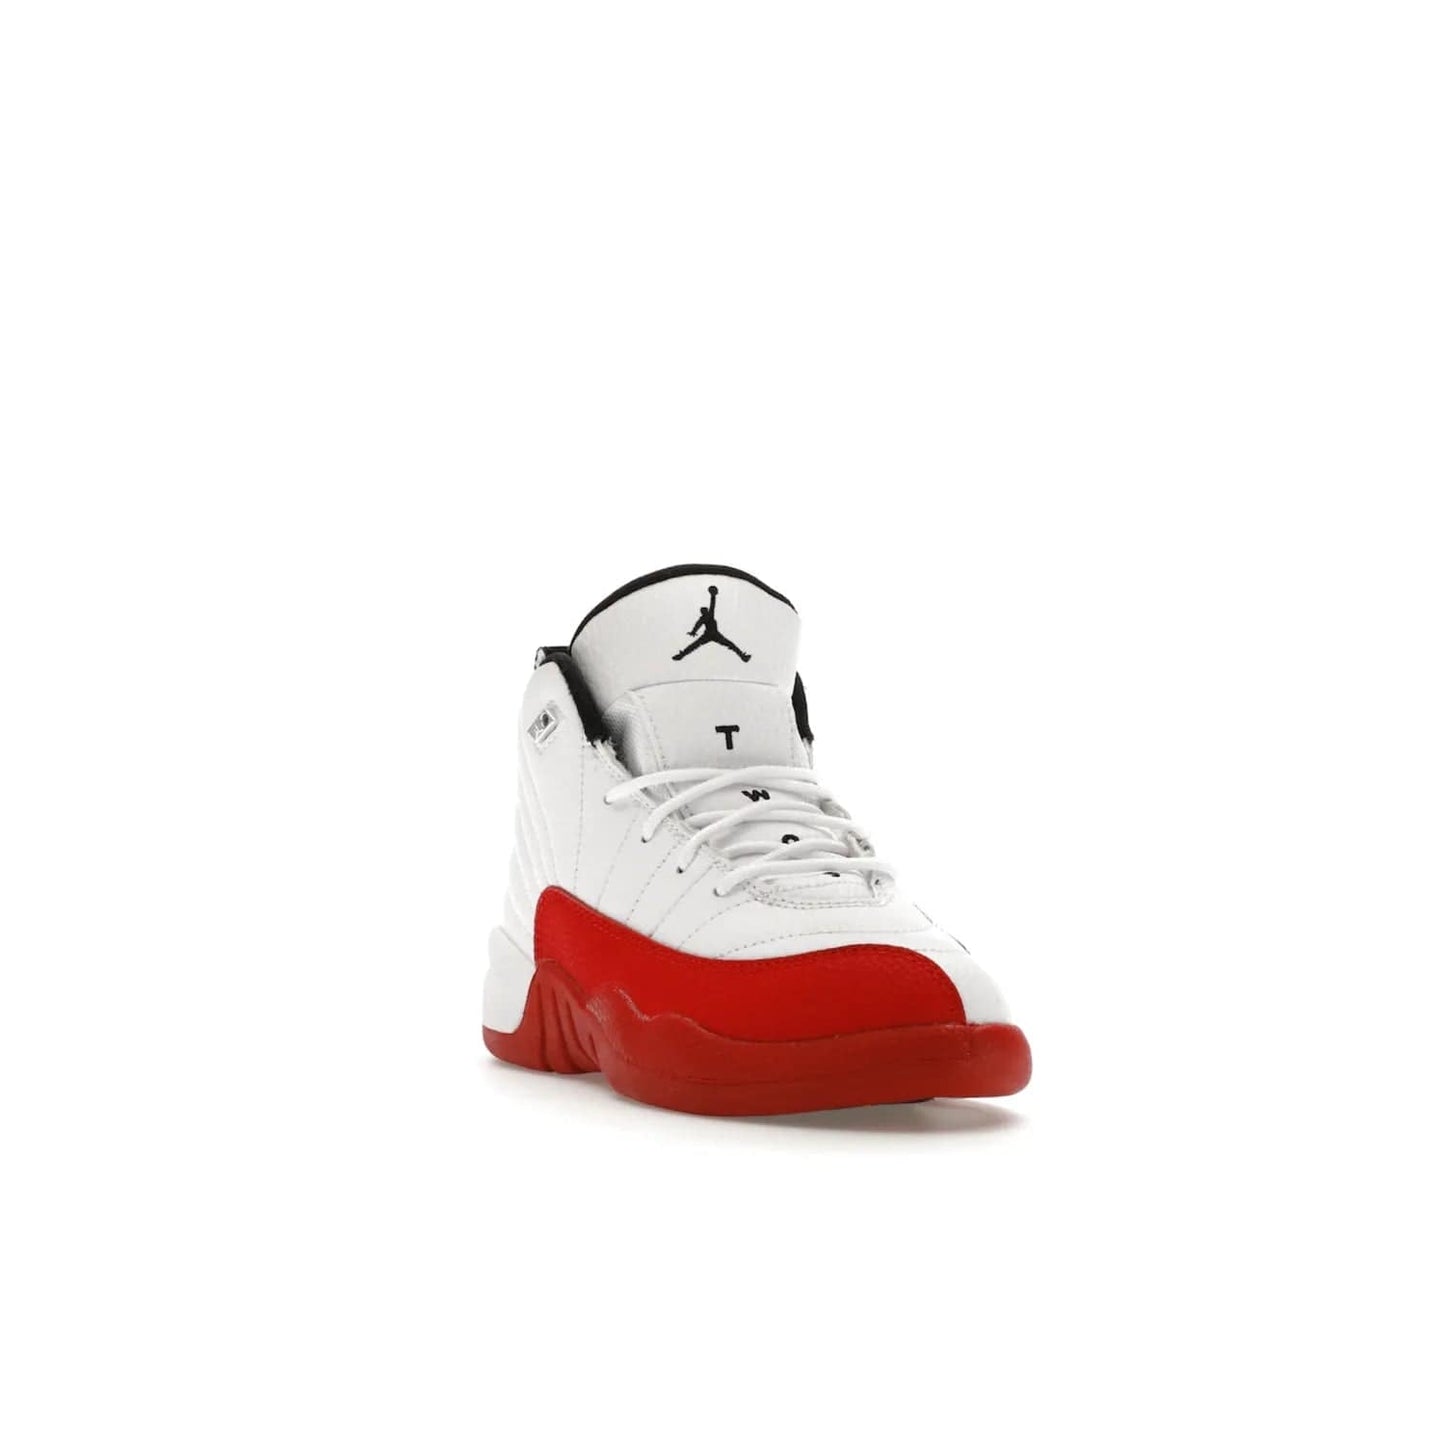 Jordan 12 Retro Cherry (2023) (PS) - Image 7 - Only at www.BallersClubKickz.com - Jordan 12 Retro Cherry dropping for toddlers in 2023! White leather upper with black overlays and red branding. Classic court style for your little one.